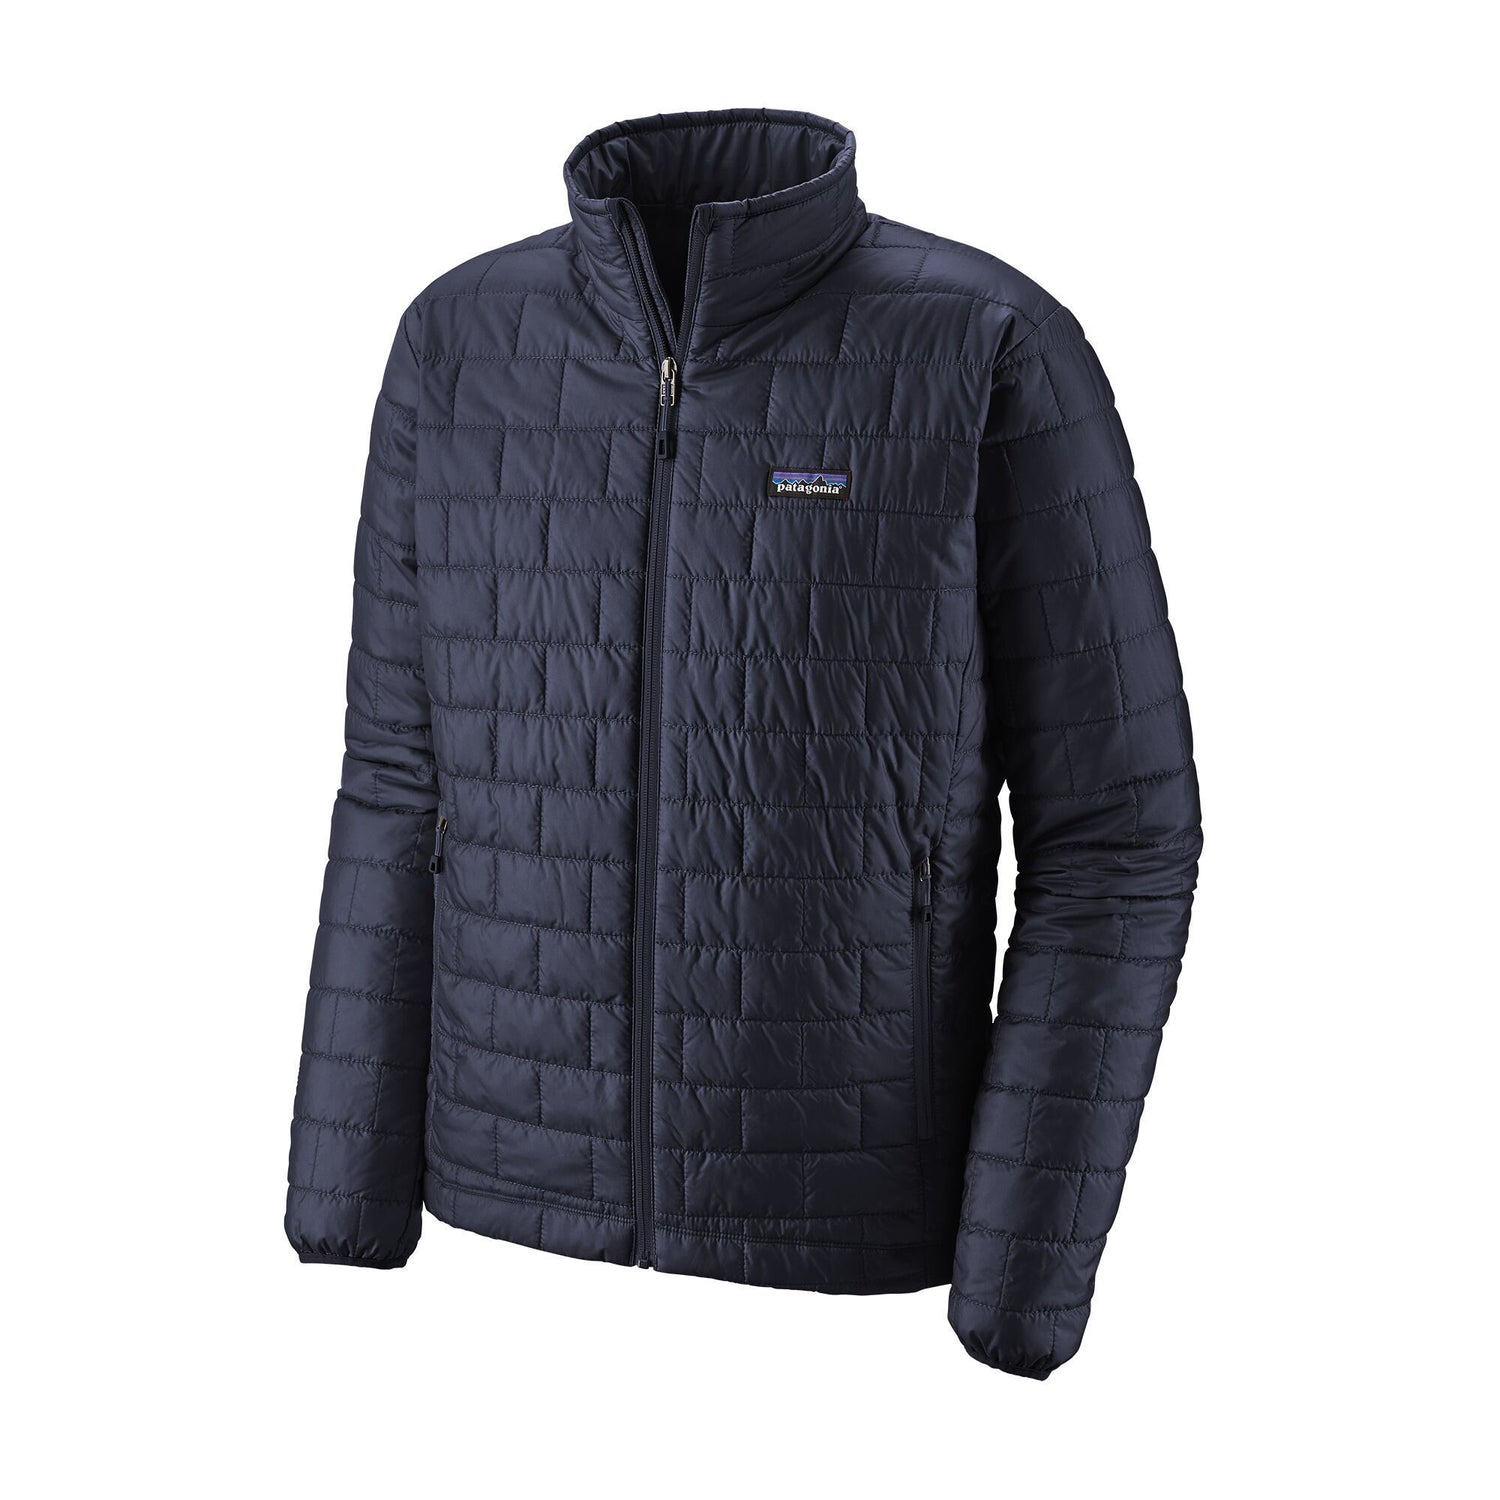 Patagonia M's Nano Puff Jacket - 100% Recycled Polyester Classic Navy Jacket